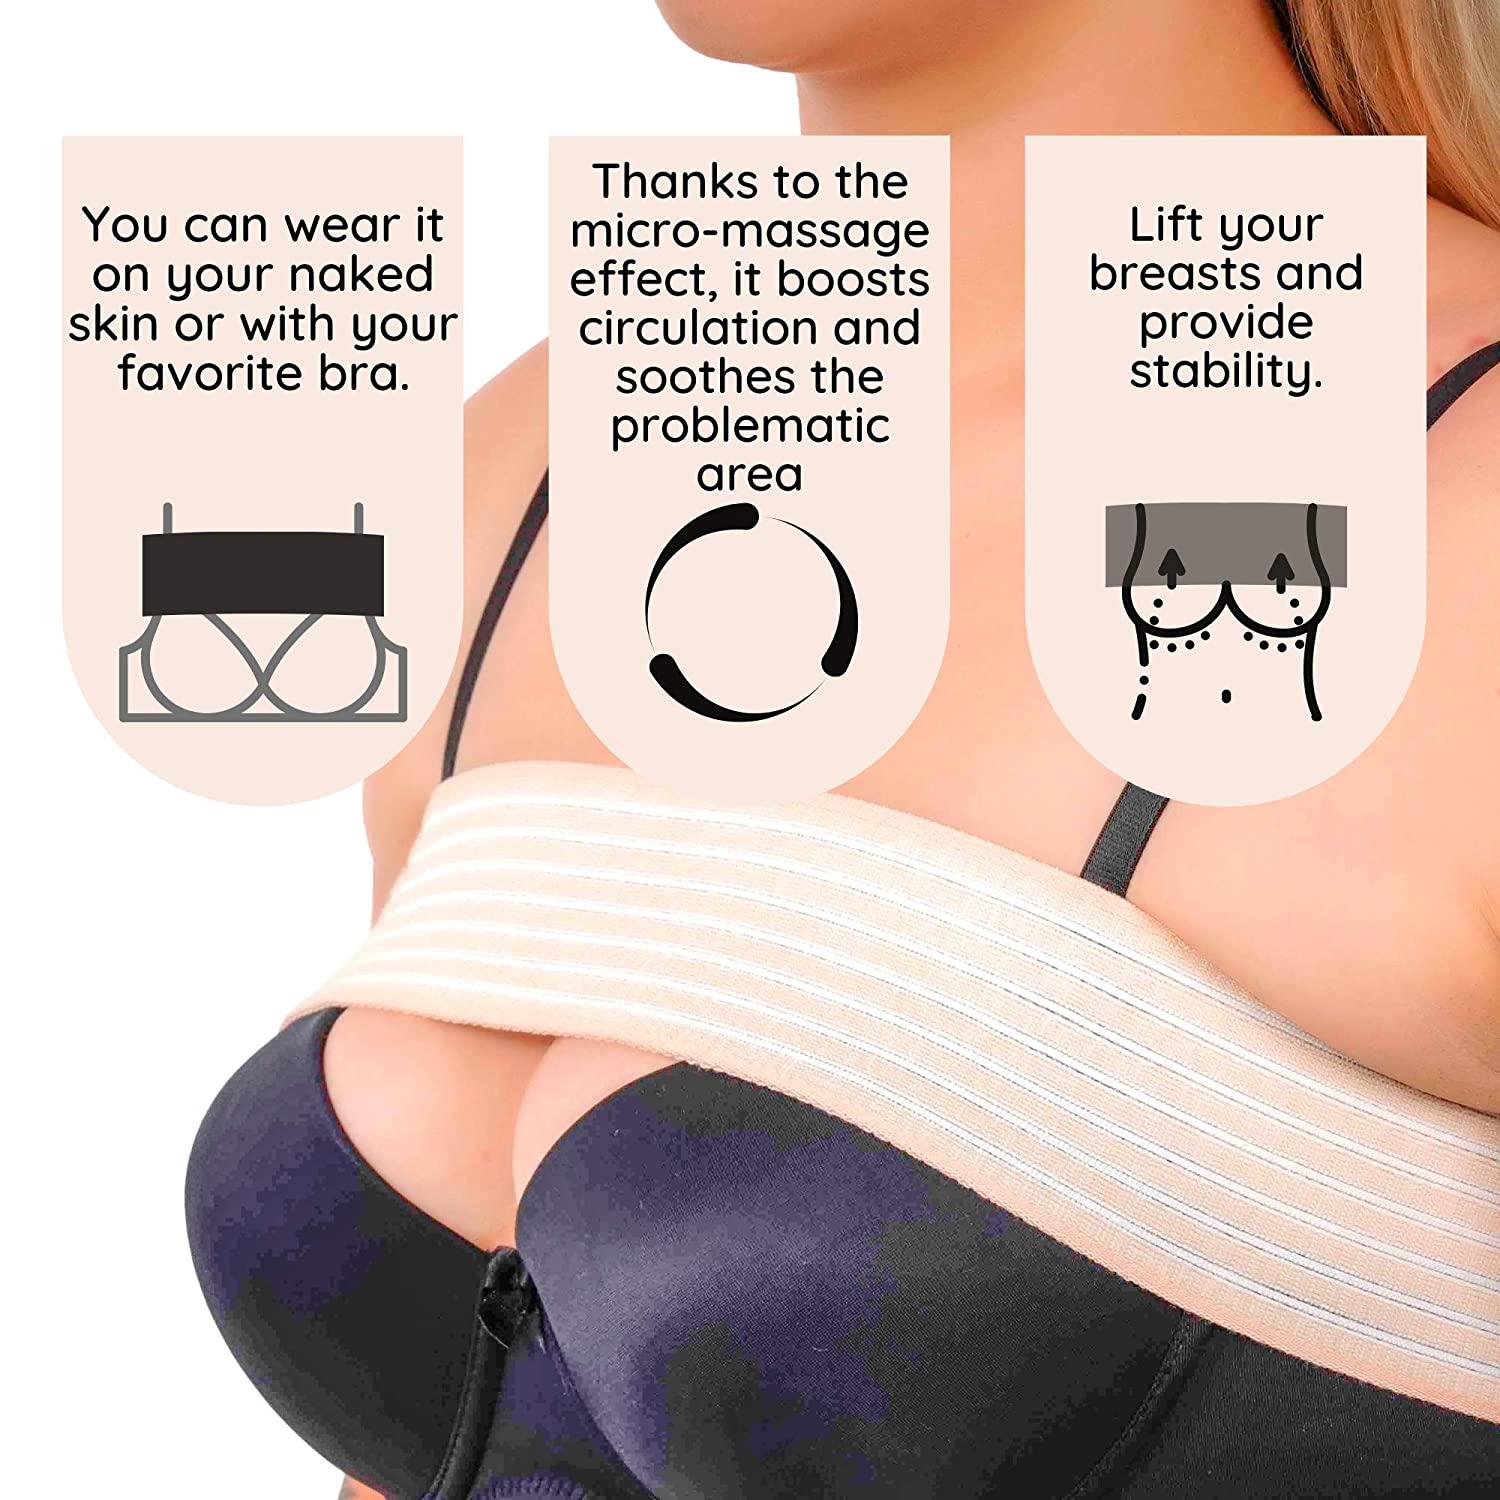 POST- OP OPERATIVE BRA AFTER ANY BREAST SURGERIES – ACTIVE EFFECT AGAINST  HAIR LOSS